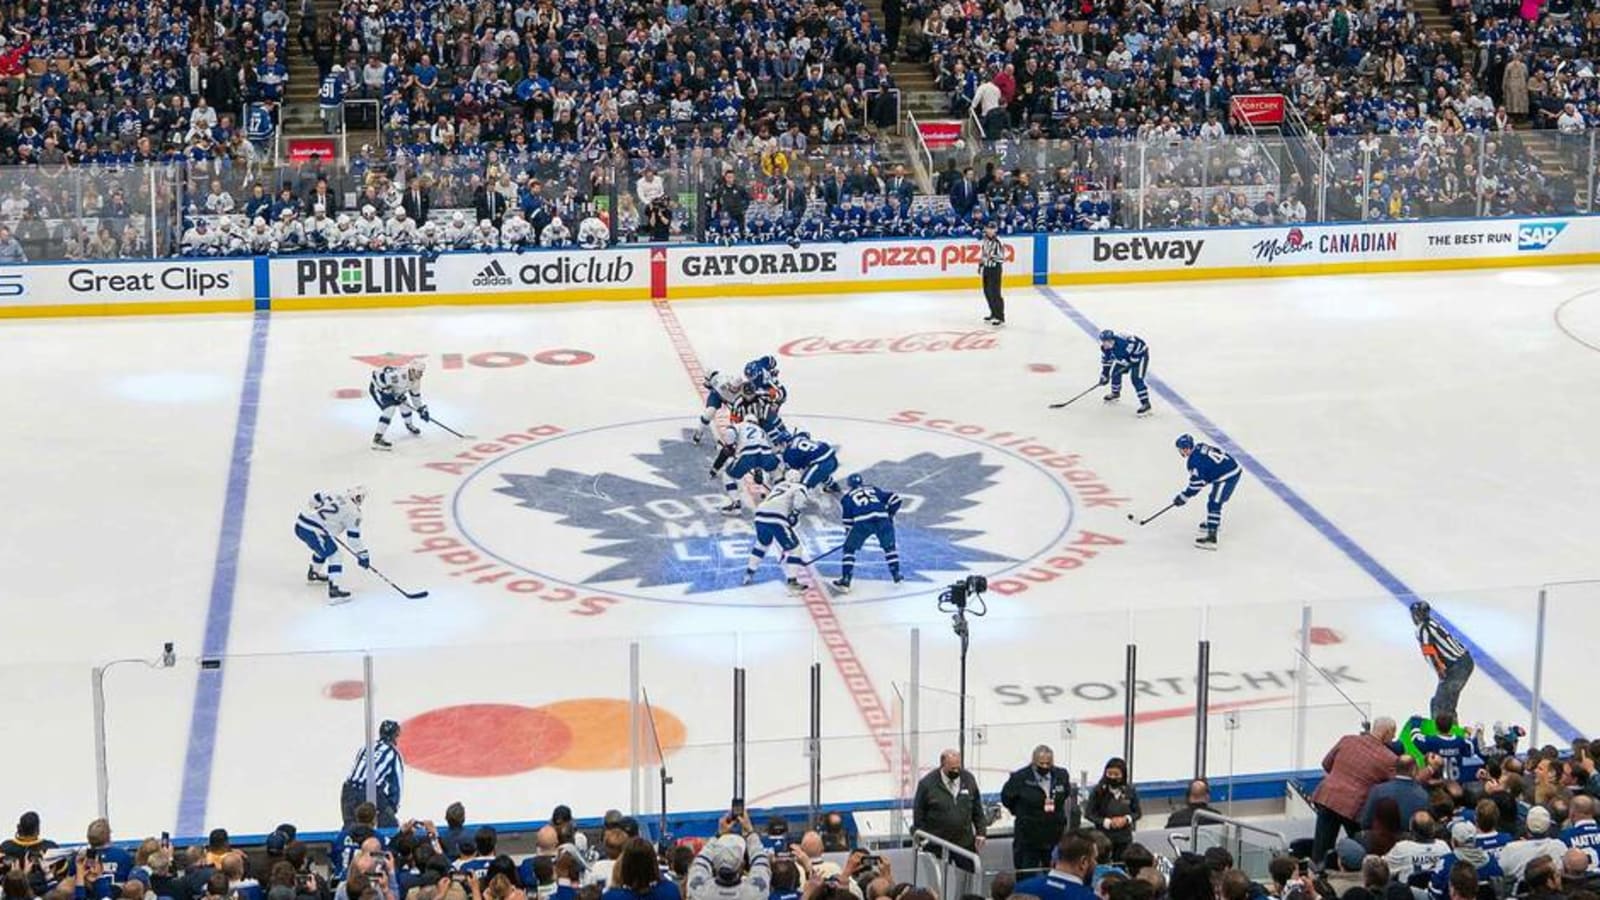 Looking back at the last time the Leafs hosted the NHL All-Star